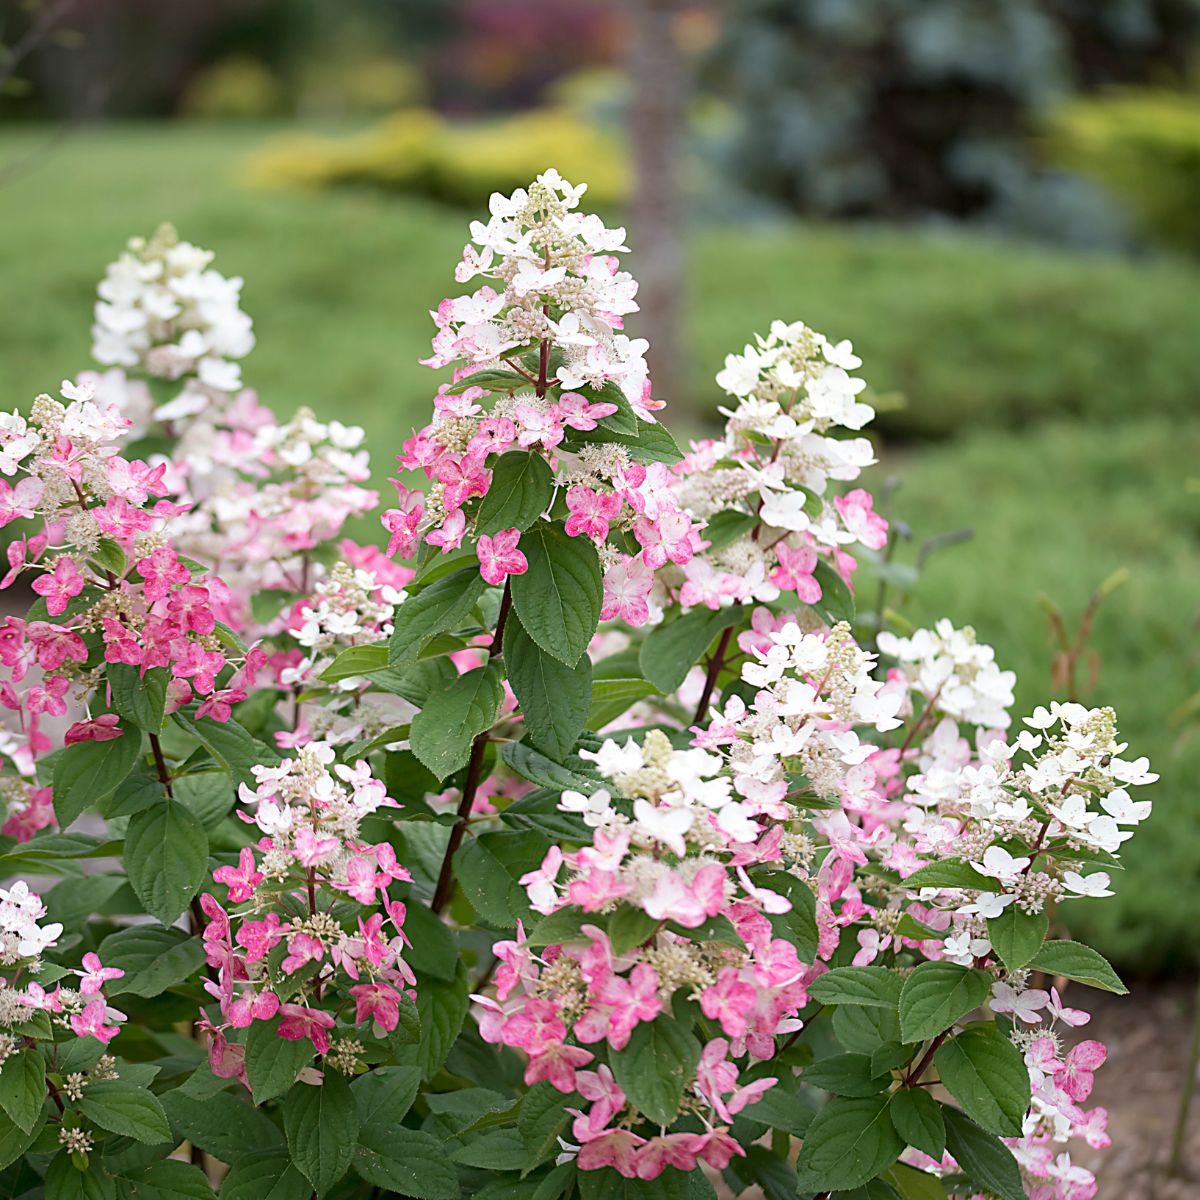 Gorgeous spiky hydrangea blooms in white and pink shades.